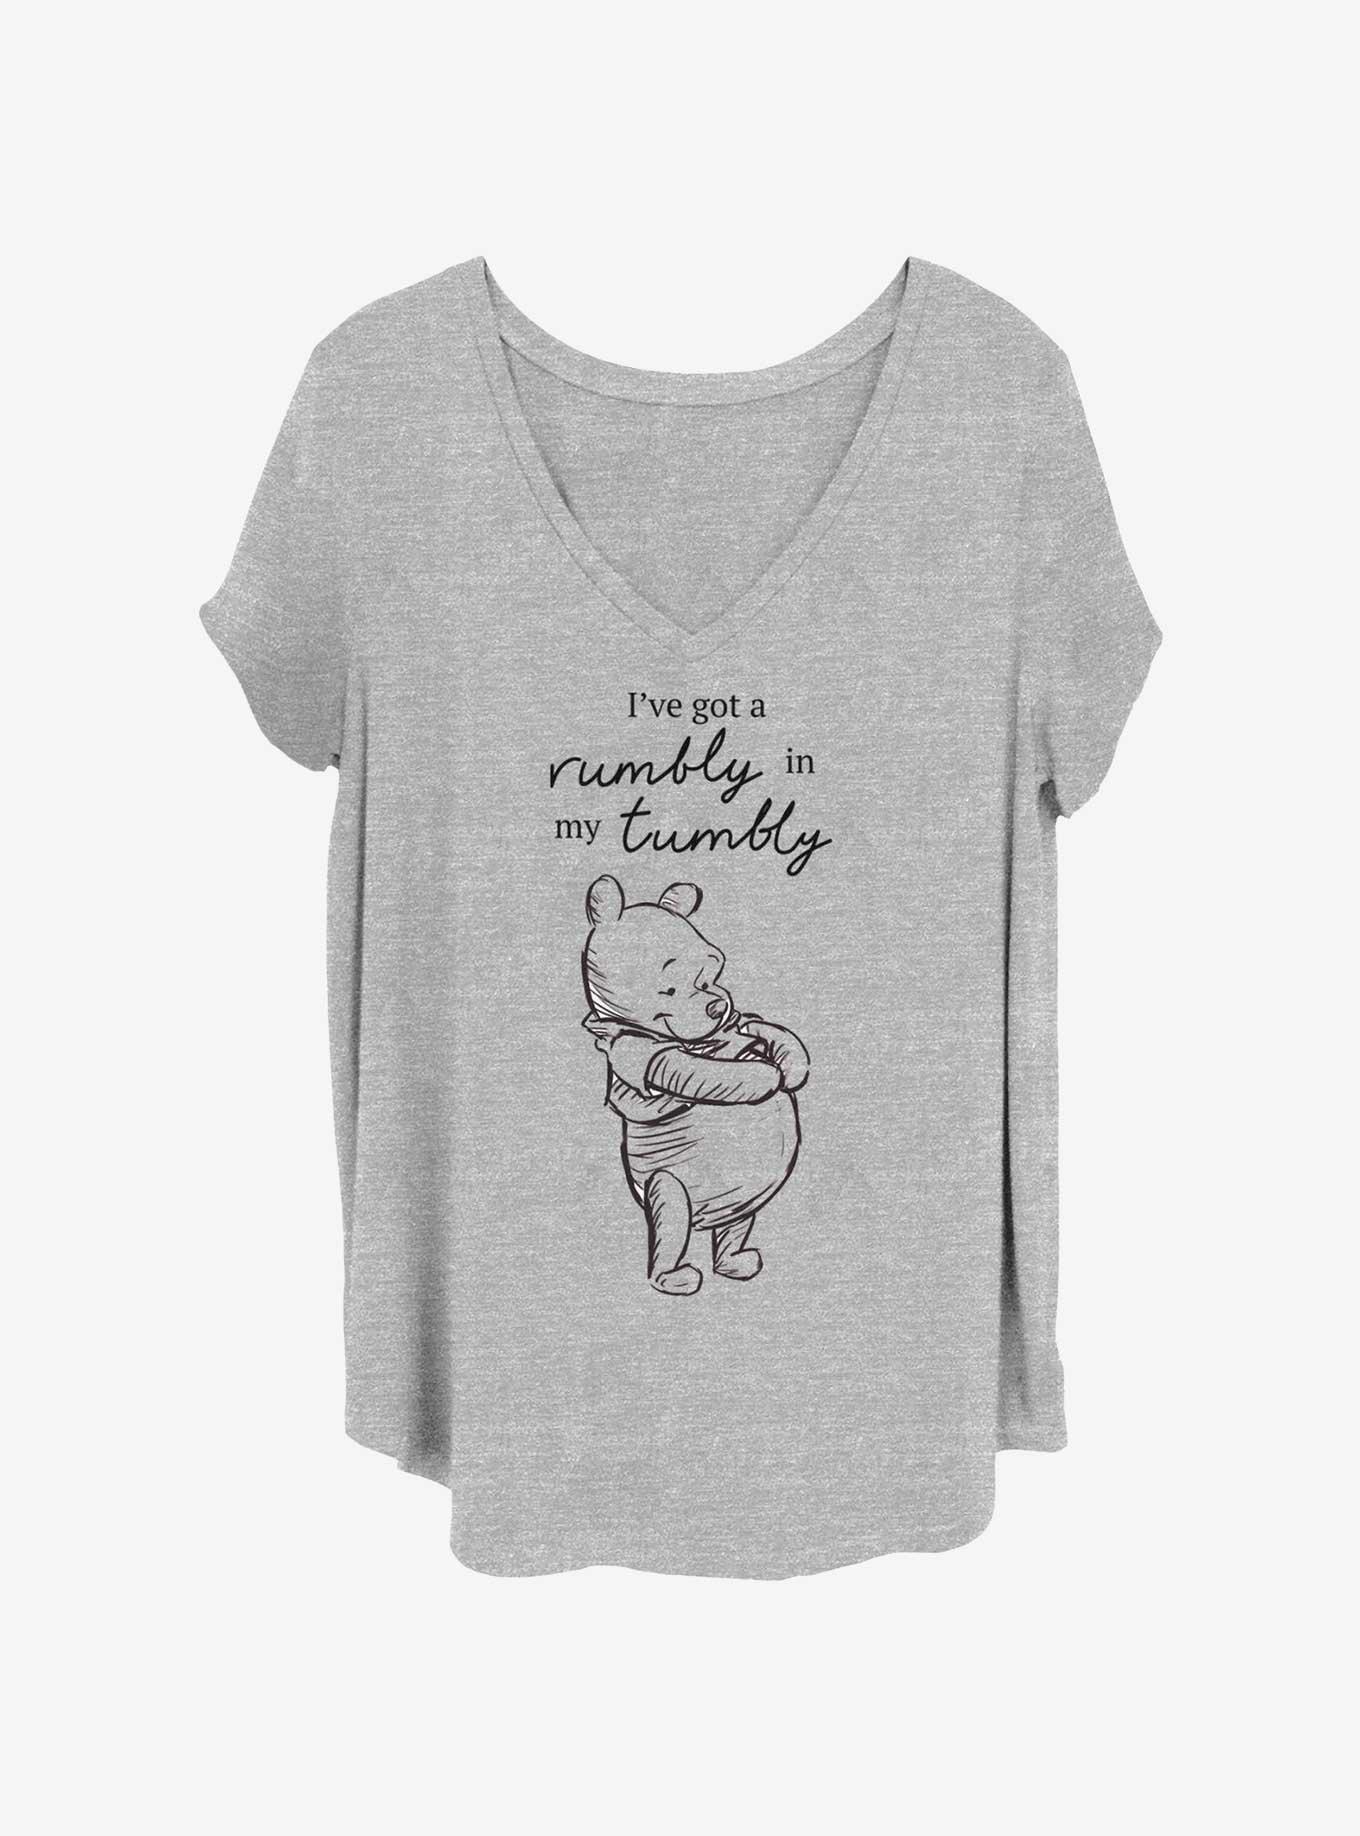 Disney Winnie The Pooh Rumbly In My Tumbly Girls T-Shirt Plus Size, HEATHER GR, hi-res